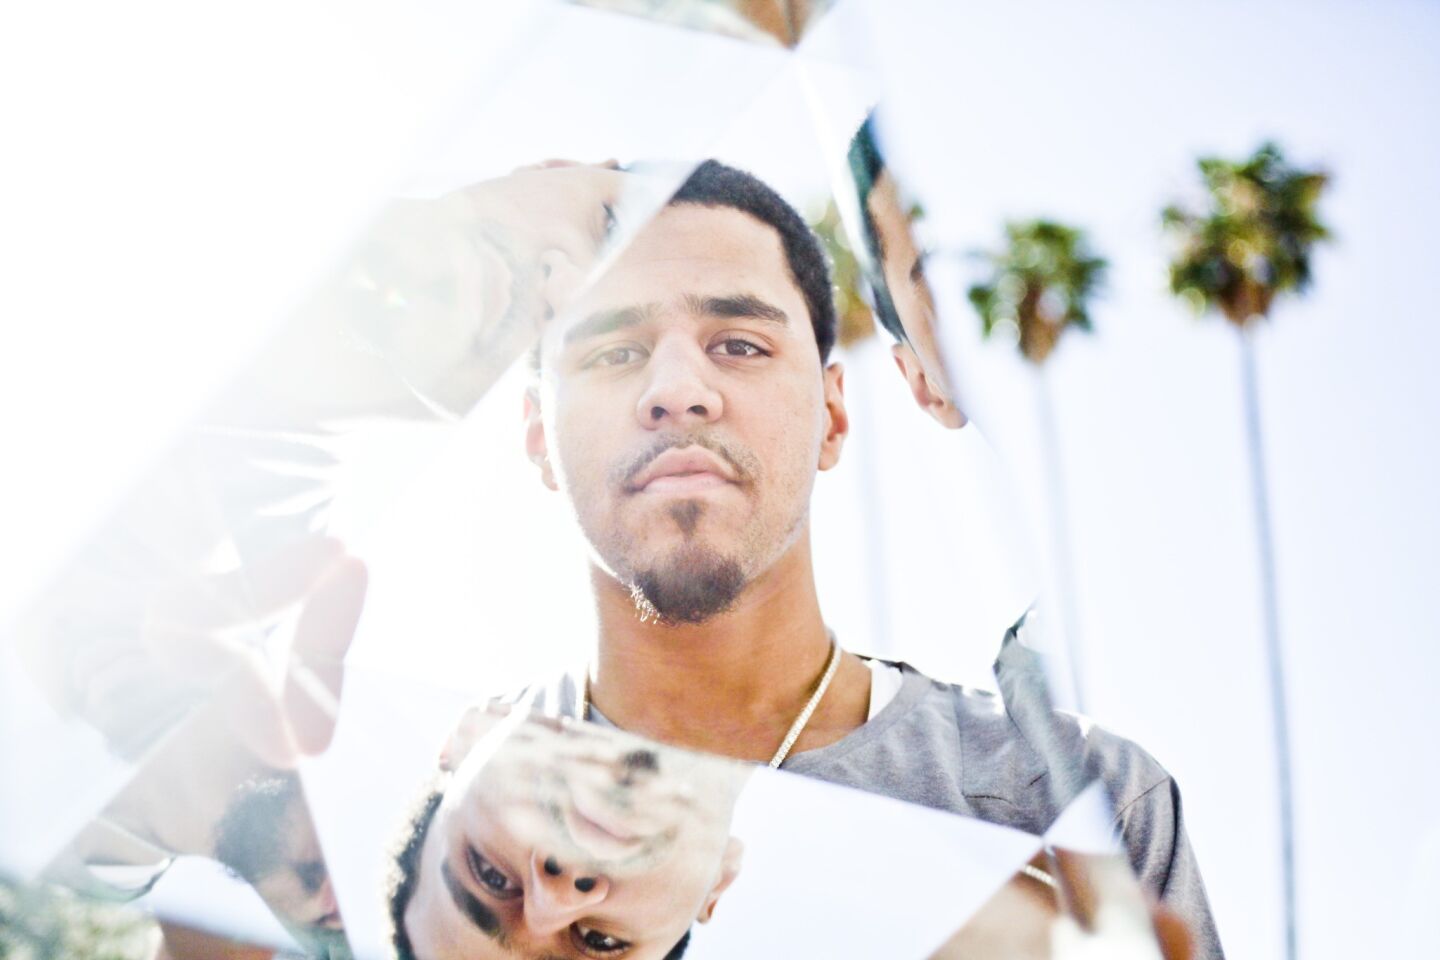 J. Cole, seen here looking through a prism of mirrors, has released his second album, "Born Sinner."